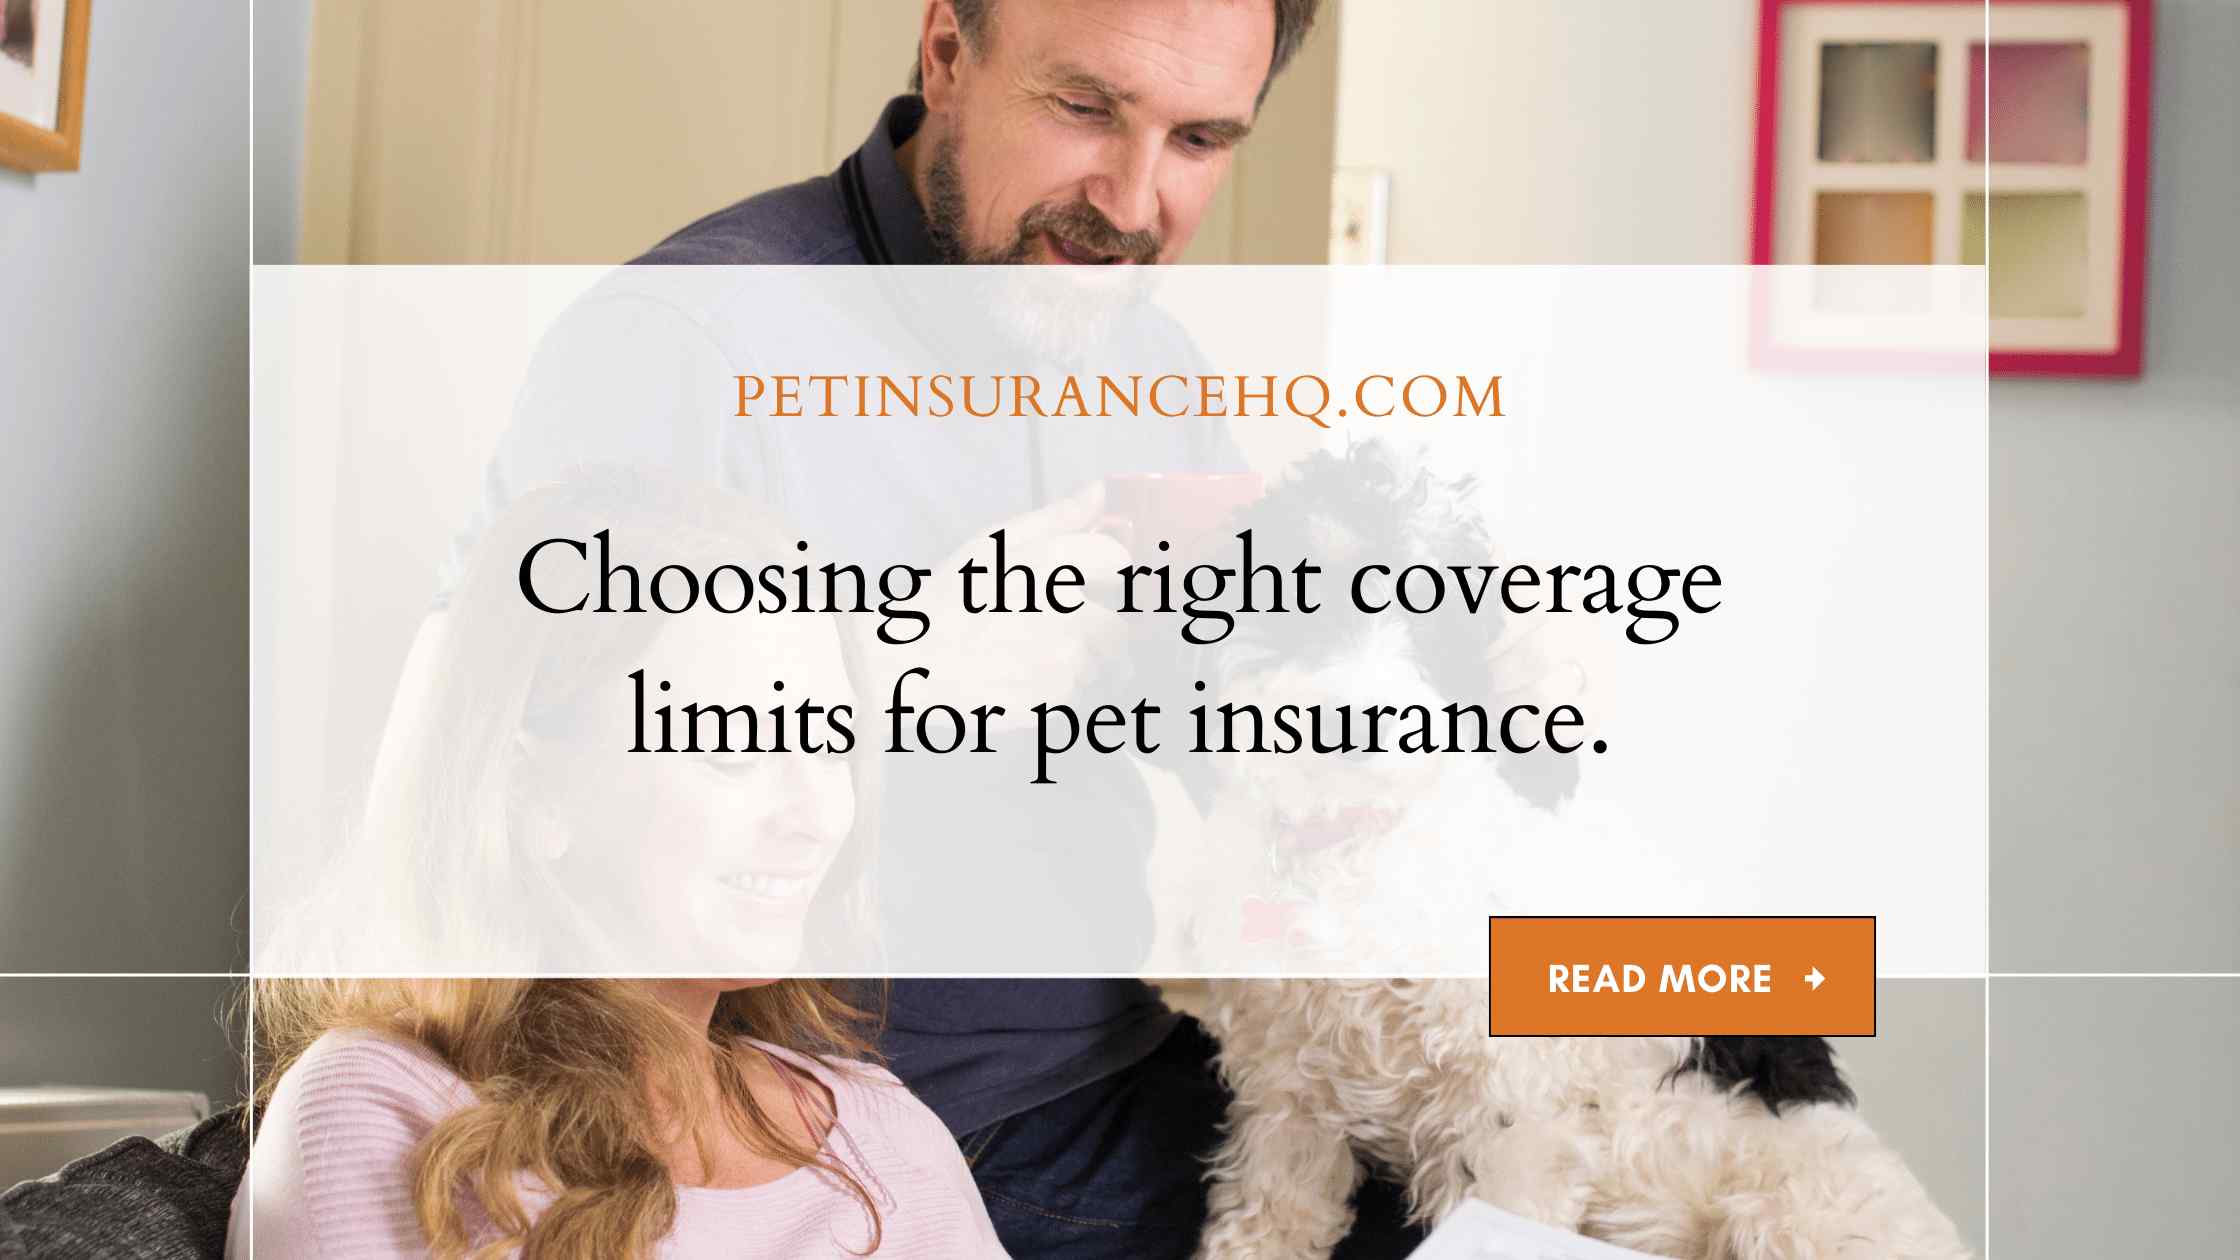 How to Choose the Right Coverage Limits for Your Pet Insurance Policy